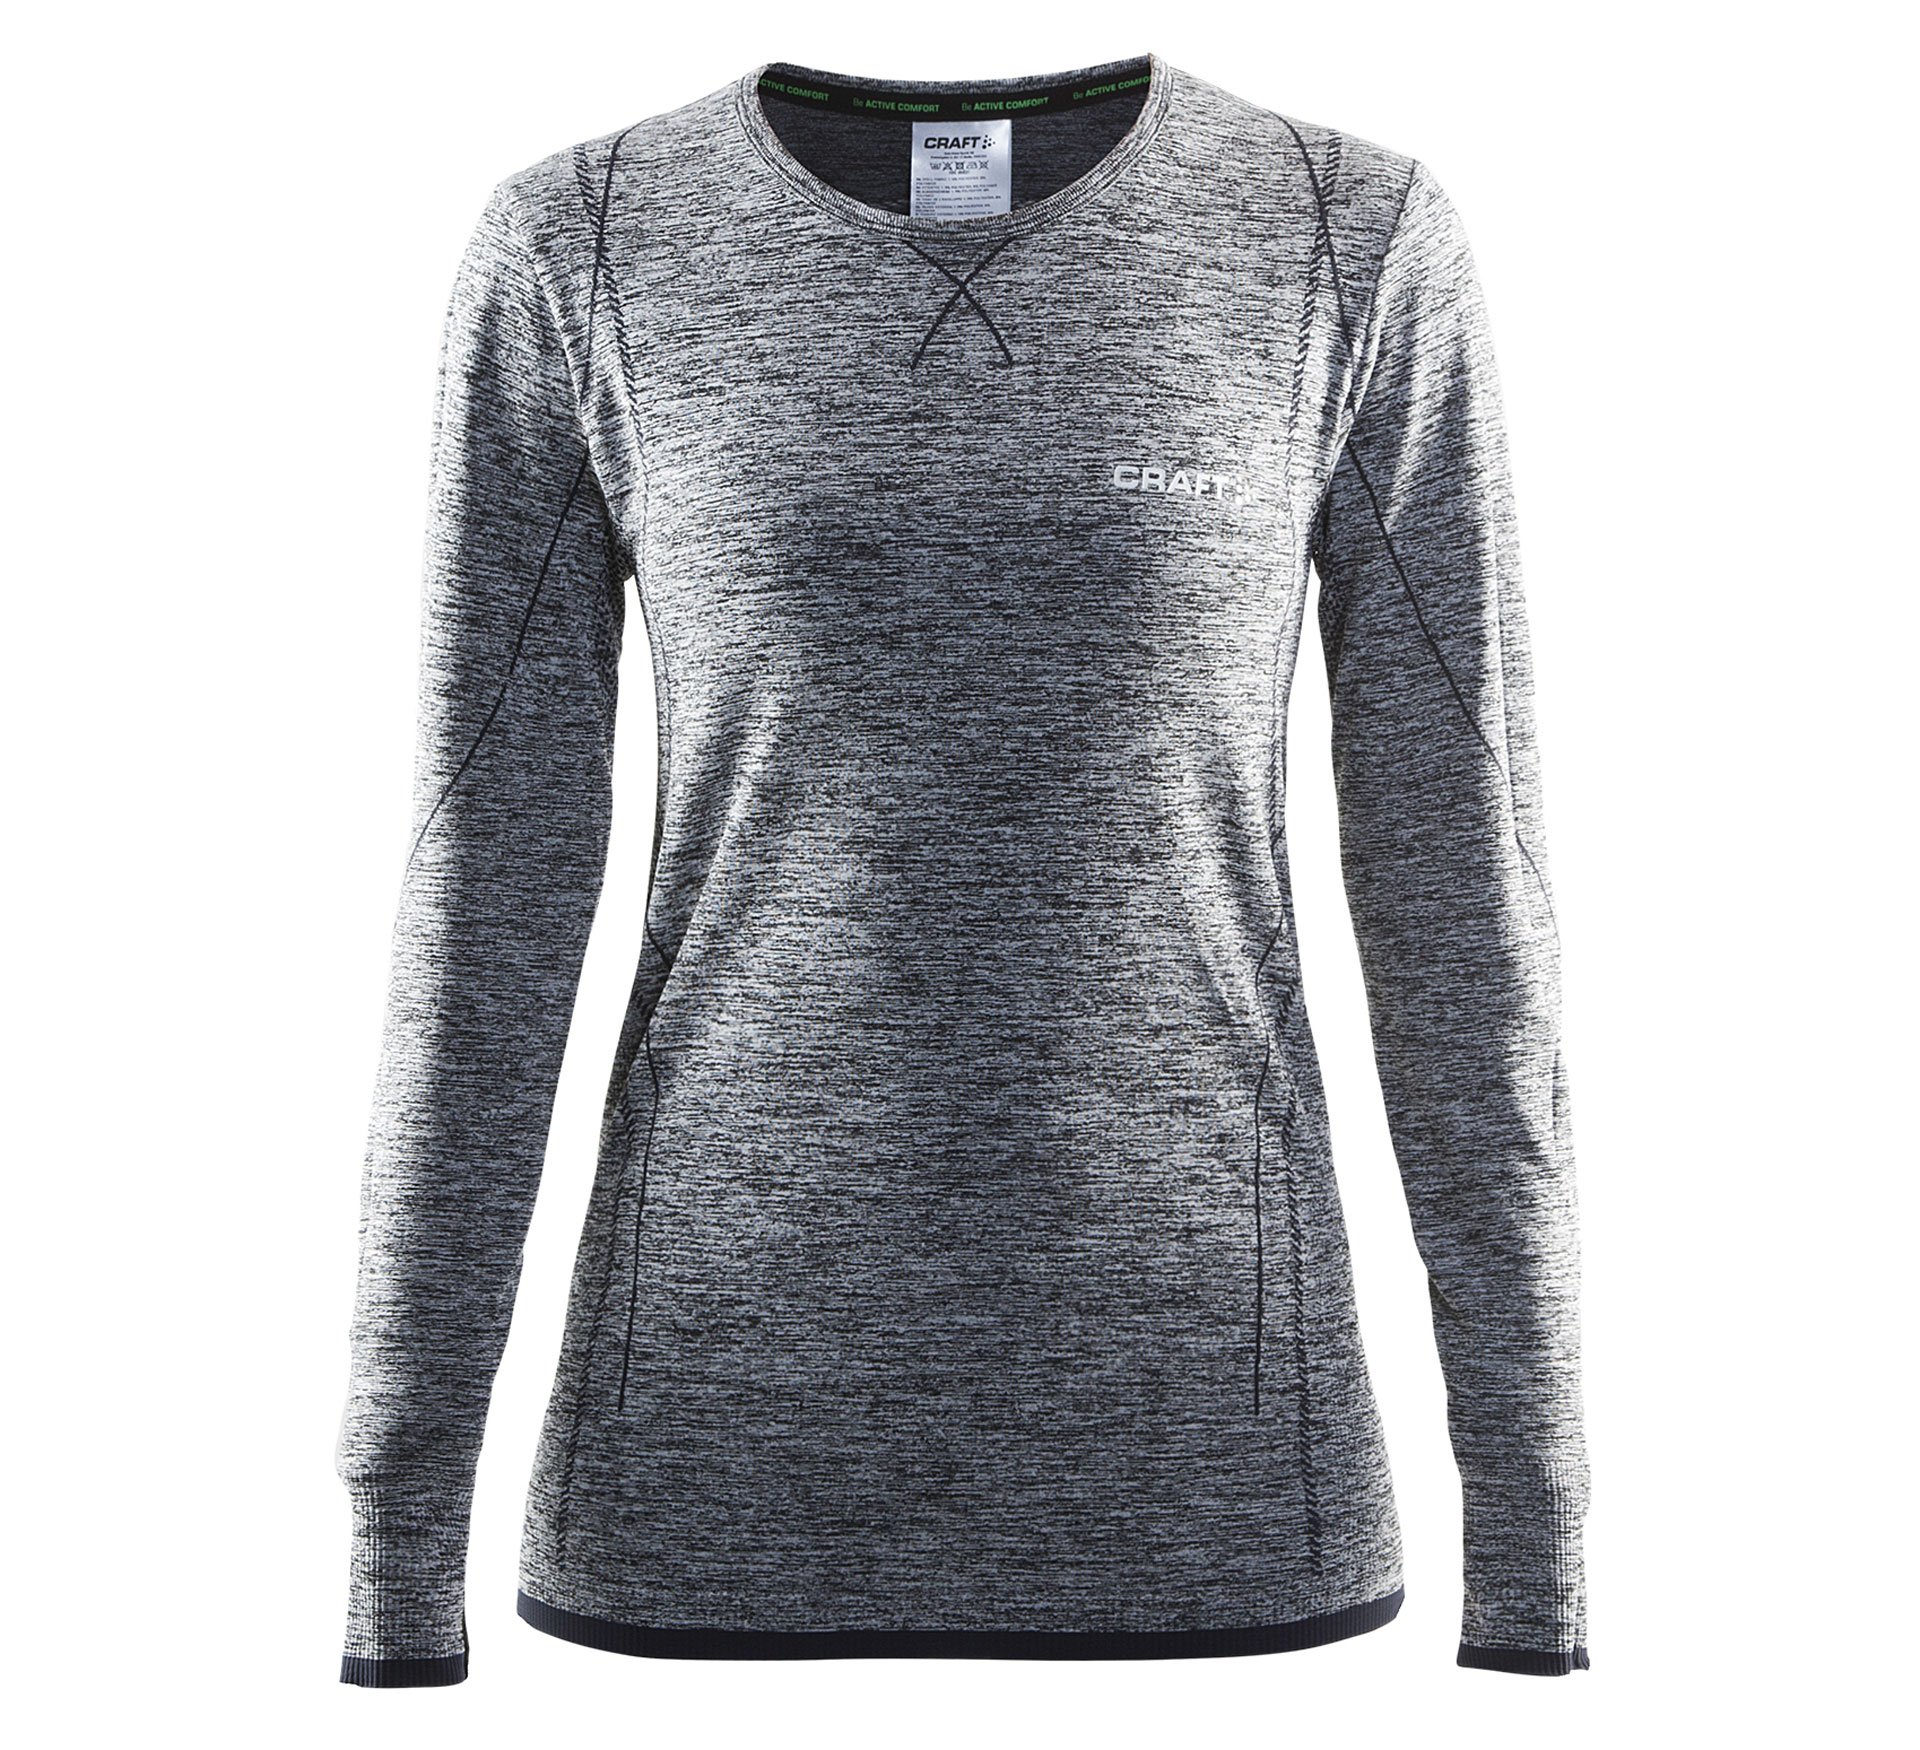 Thermo-shirt Craft Active Comfort